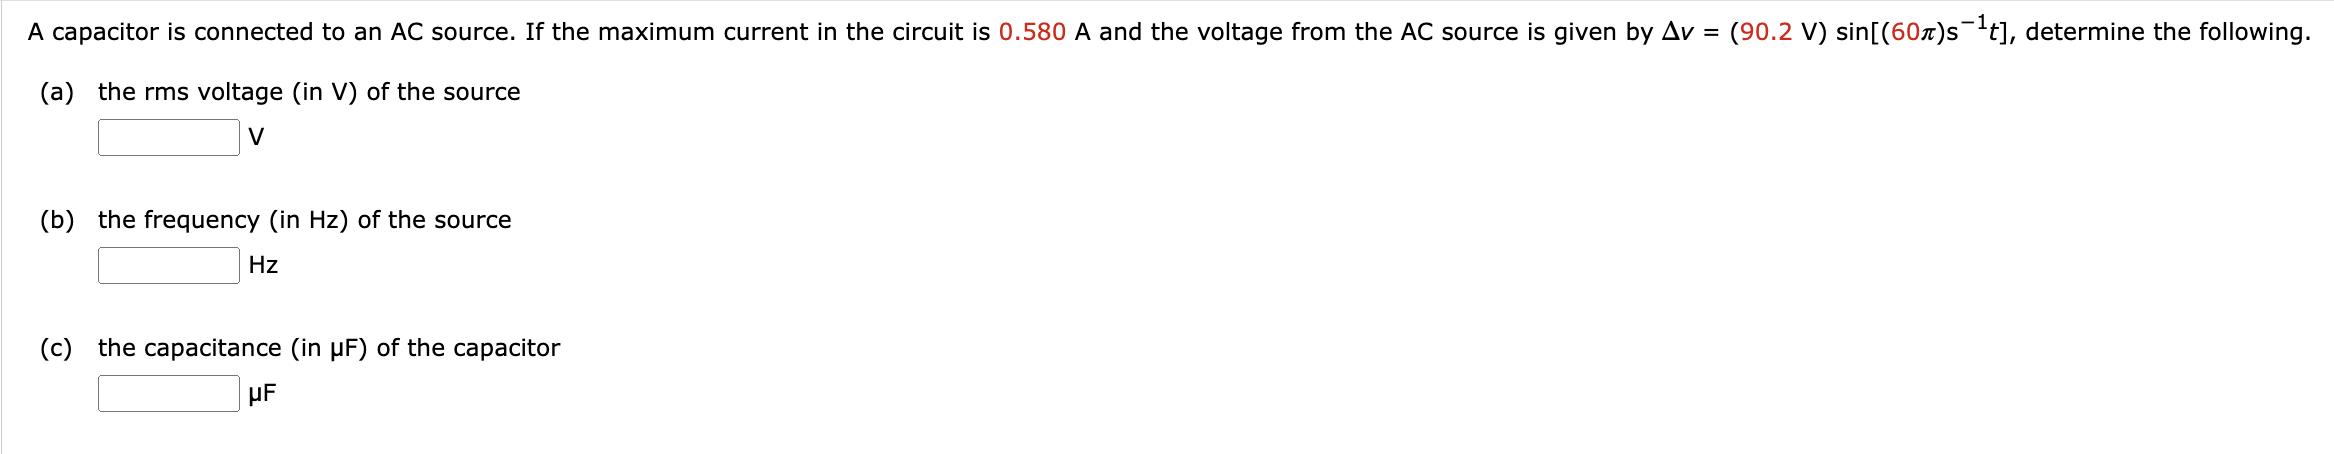 A capacitor is connected to an AC source. If the maximum current in the circuit is 0.580 A and the voltage